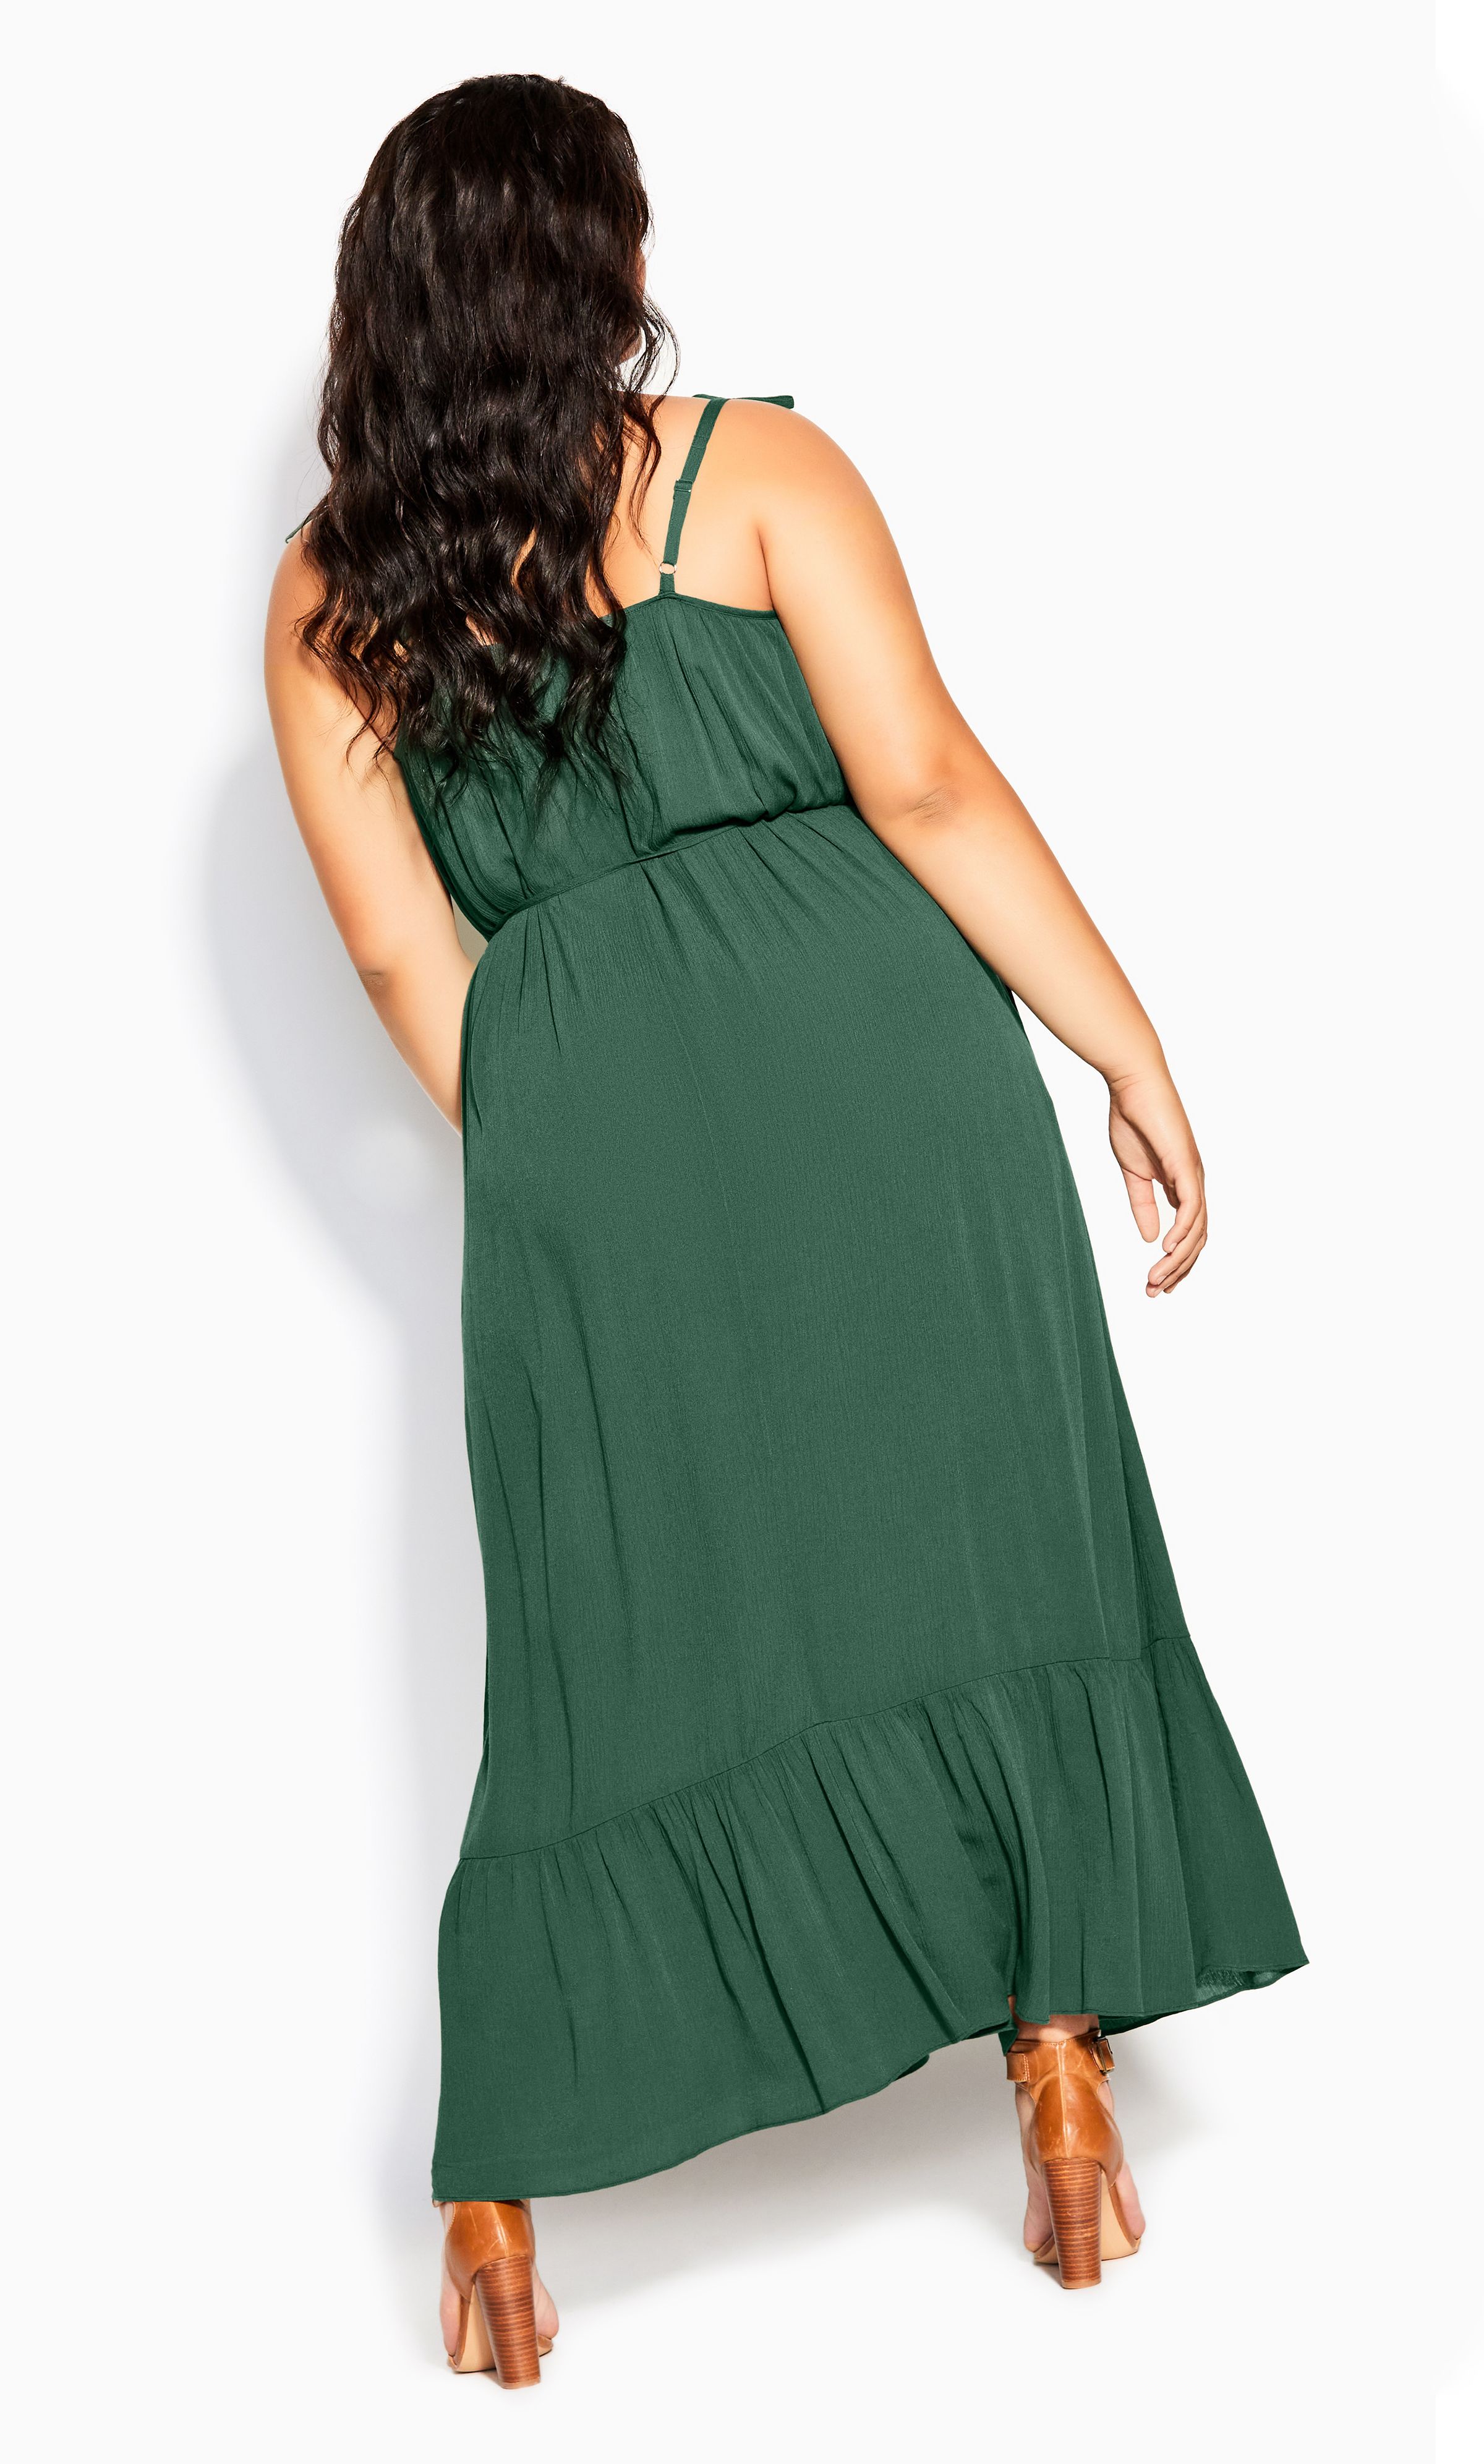 Swish and sway with elegance in the flirty Tropical Escape Maxi Dress. Doused in a flattering jungle green, with thin tied straps and a fabulously frilled hem, this floaty maxi dress is a summer must-have! Key Features Include: - Rounded neckline - Thin adjustable straps with tie feature - Removable self-tie string waist belt with tassel finishes - Pull over style - Unlined - Relaxed fit - Frilled maxi length hemline For casual weekend strolls to the shops, dress this look down with simple slides. Doll it up for sunset cocktails by adding a pair of strappy block heels.